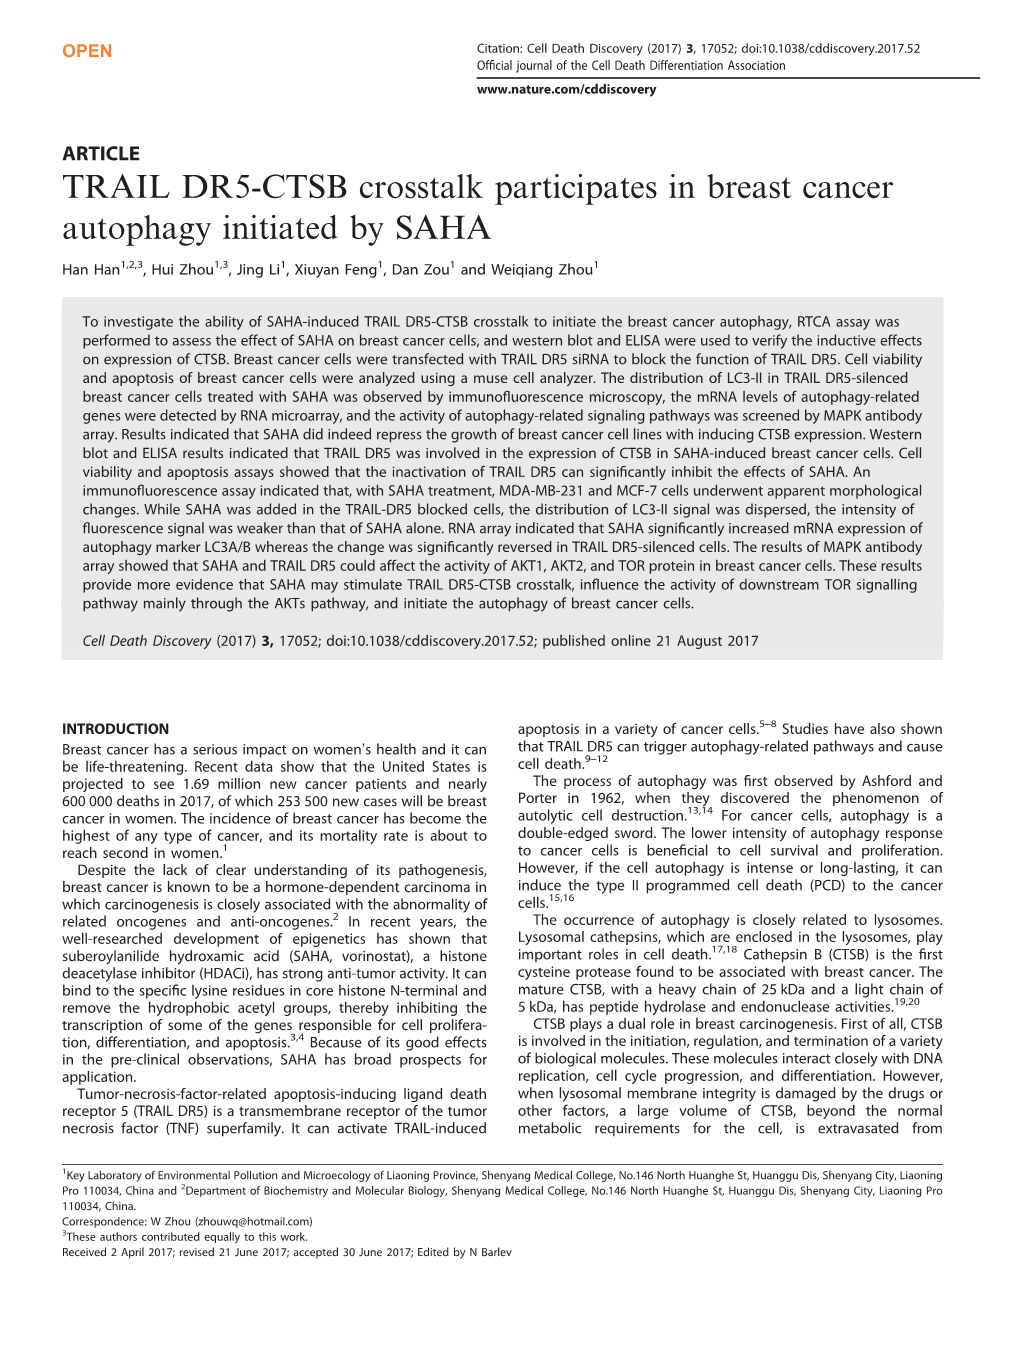 TRAIL DR5-CTSB Crosstalk Participates in Breast Cancer Autophagy Initiated by SAHA